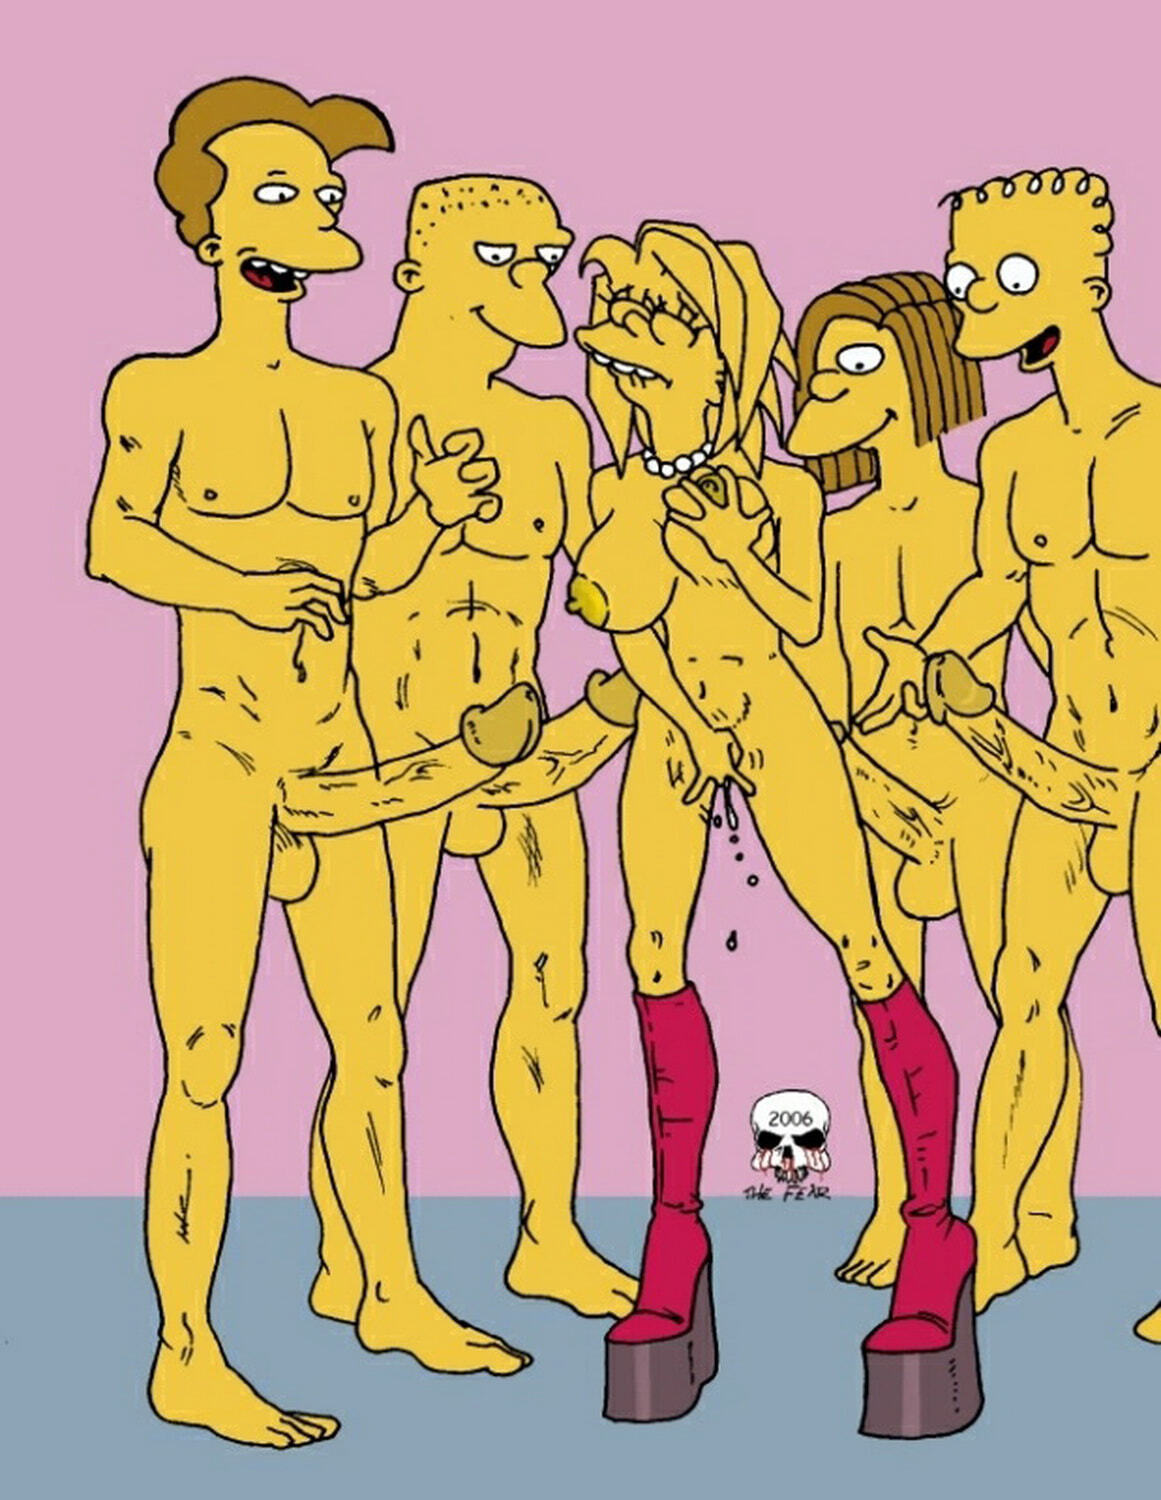 Simpsons fear porn - Best adult videos and photos